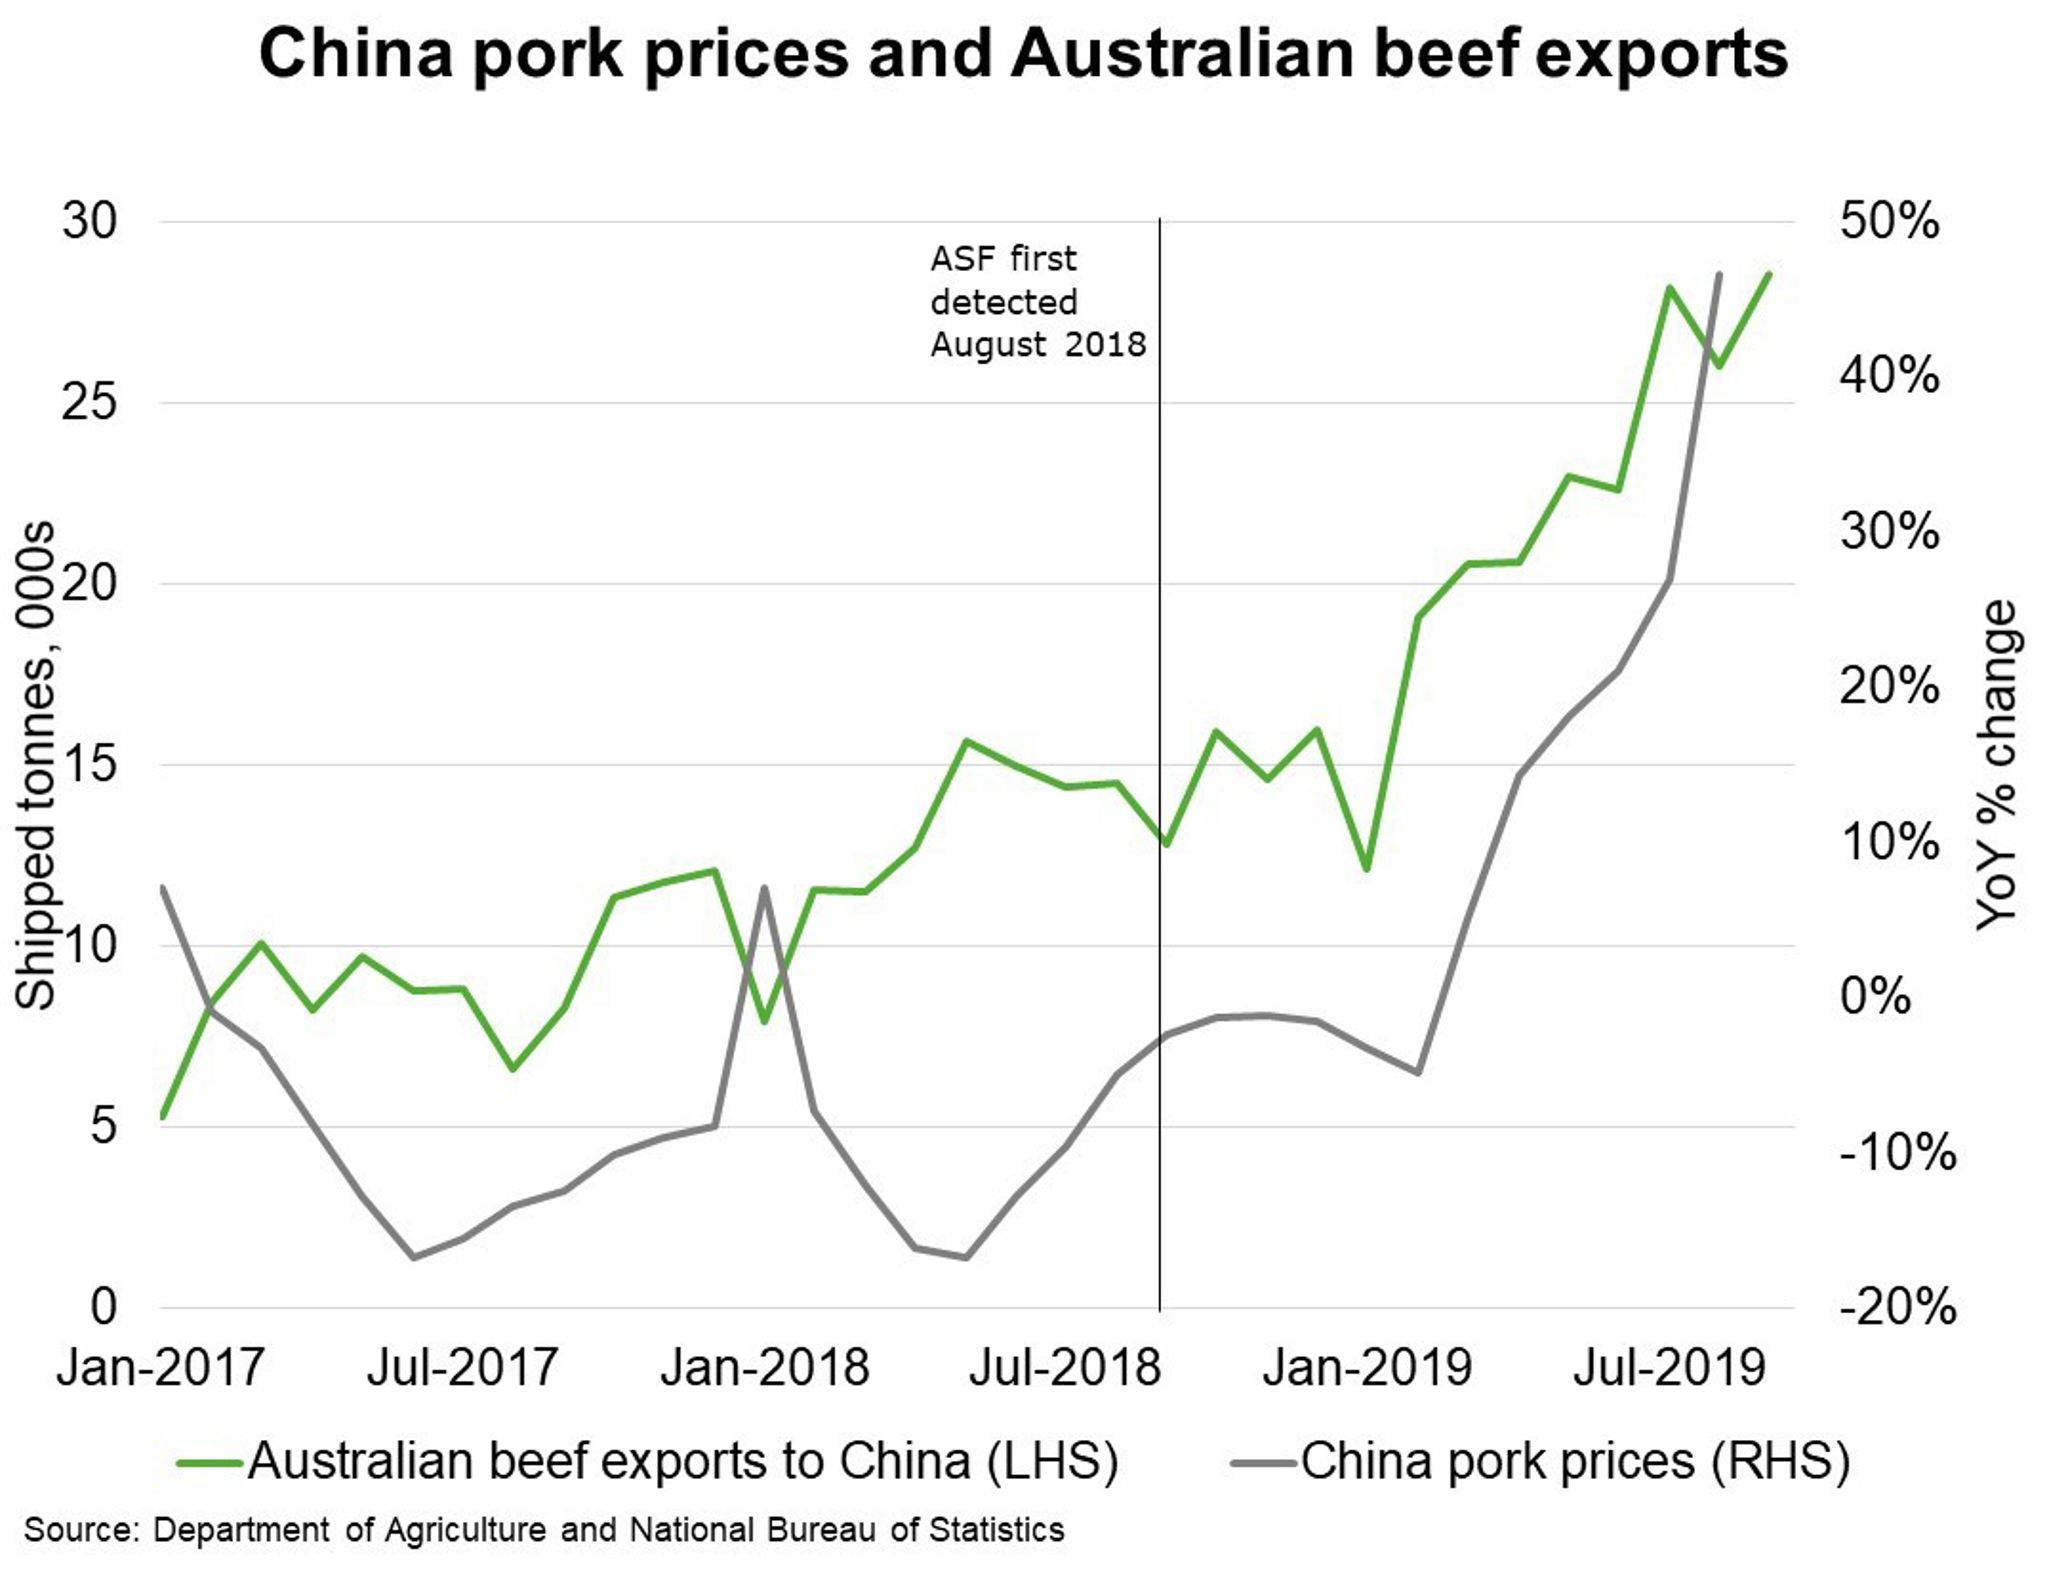 China – African swine fever supports demand for Australian beef exports